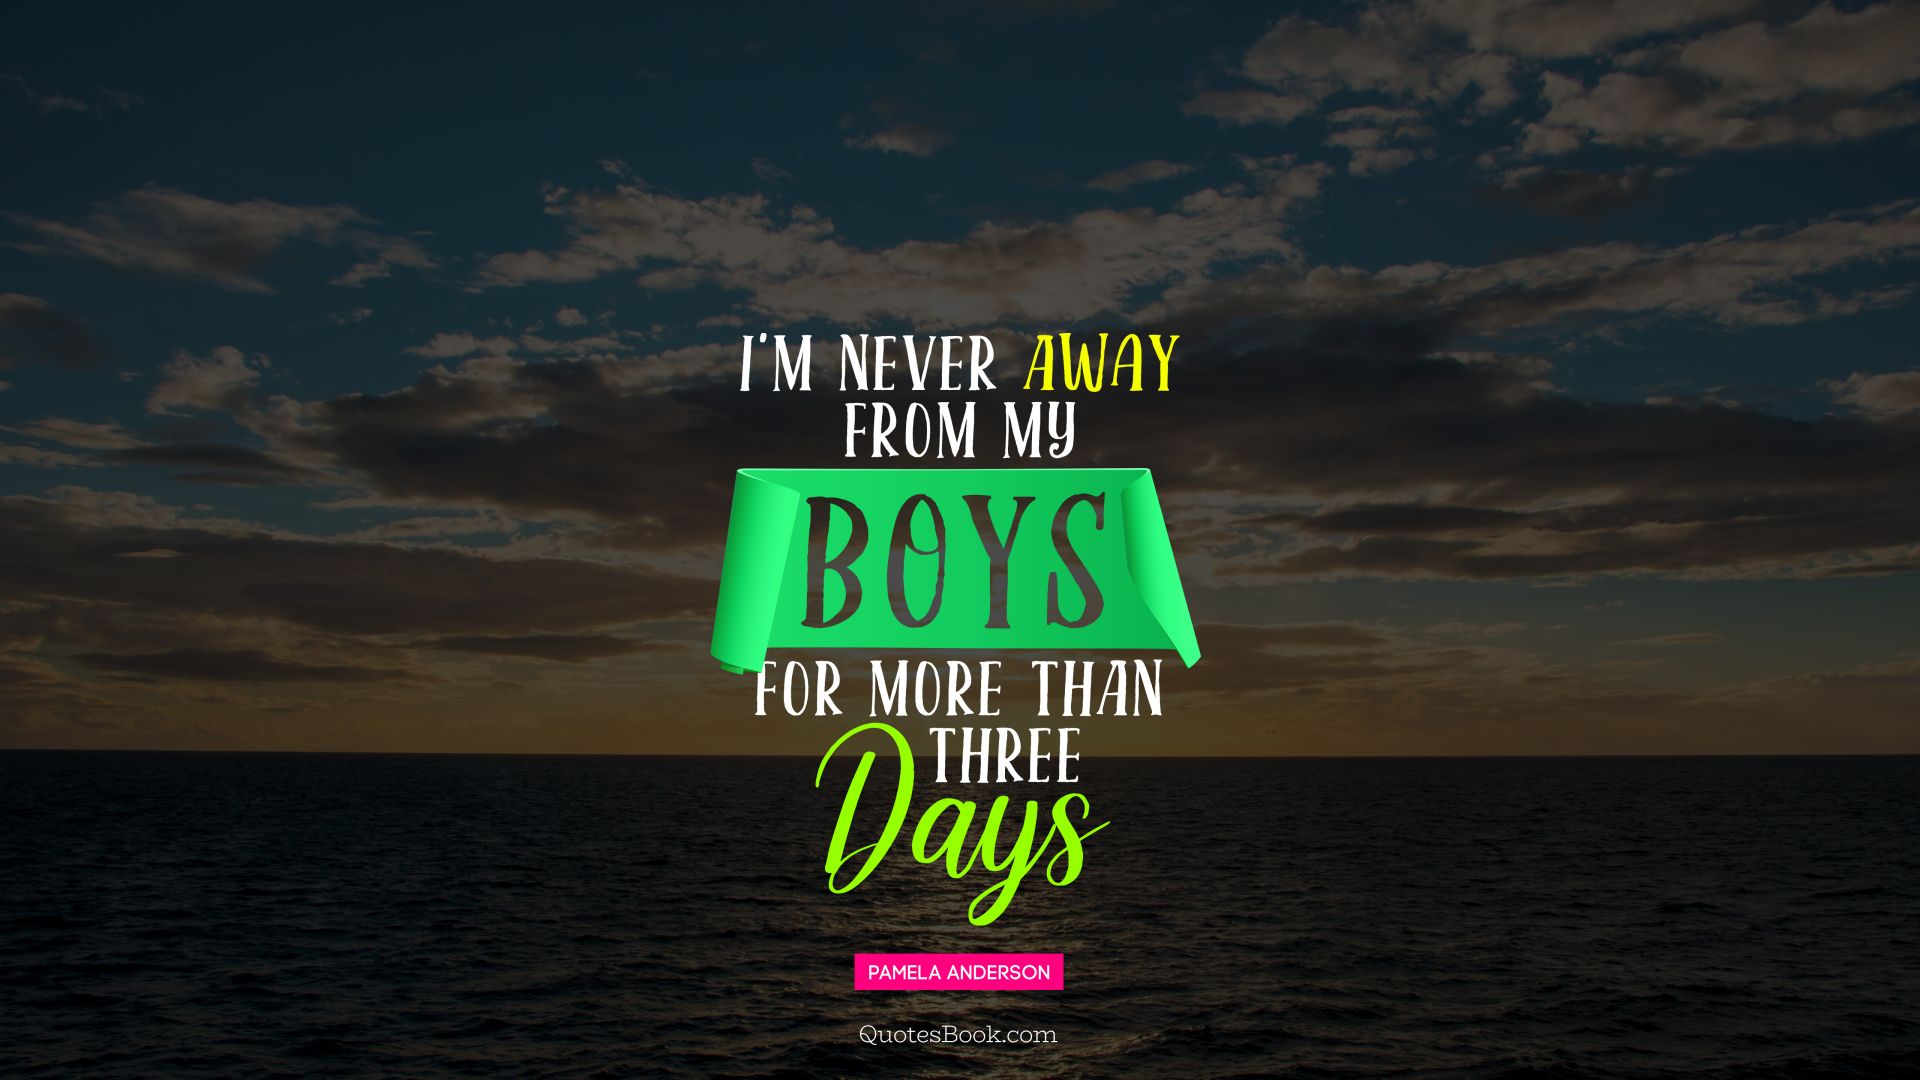 I'm never away from my boys for more than three days. - Quote by Pamela Anderson